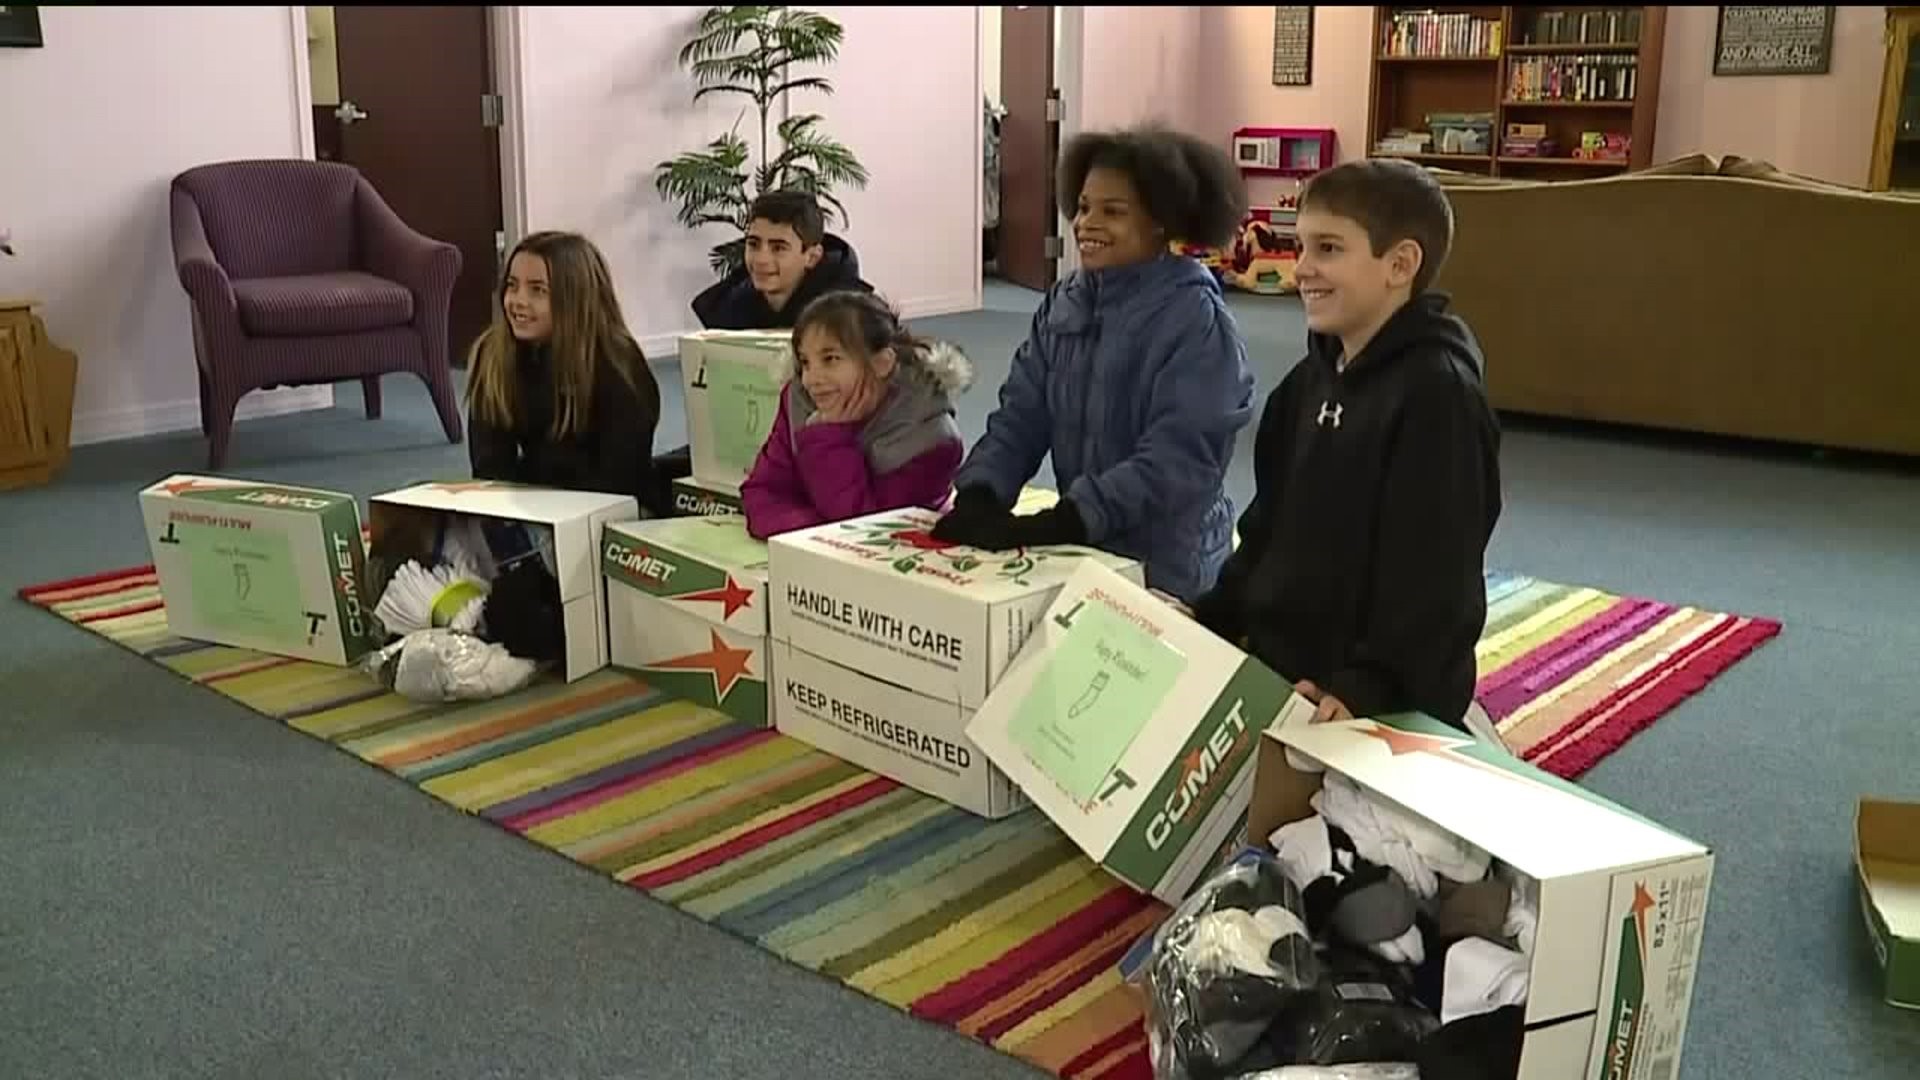 Students in Williamsport Donate Items, Collect for Classmates